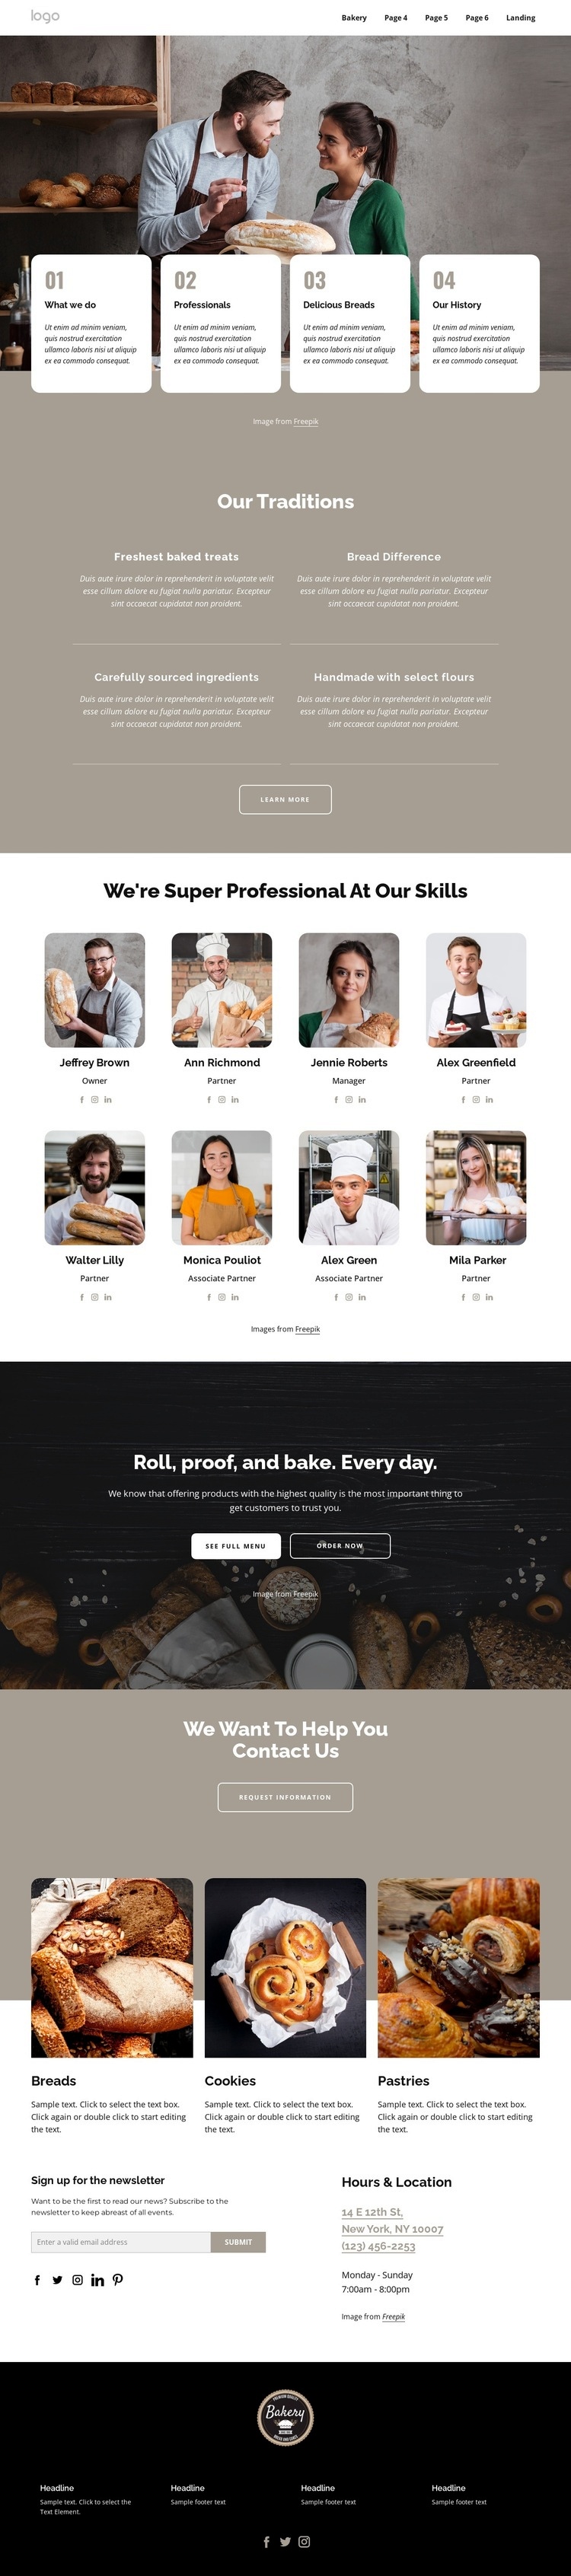 We are professional bakers Web Page Design